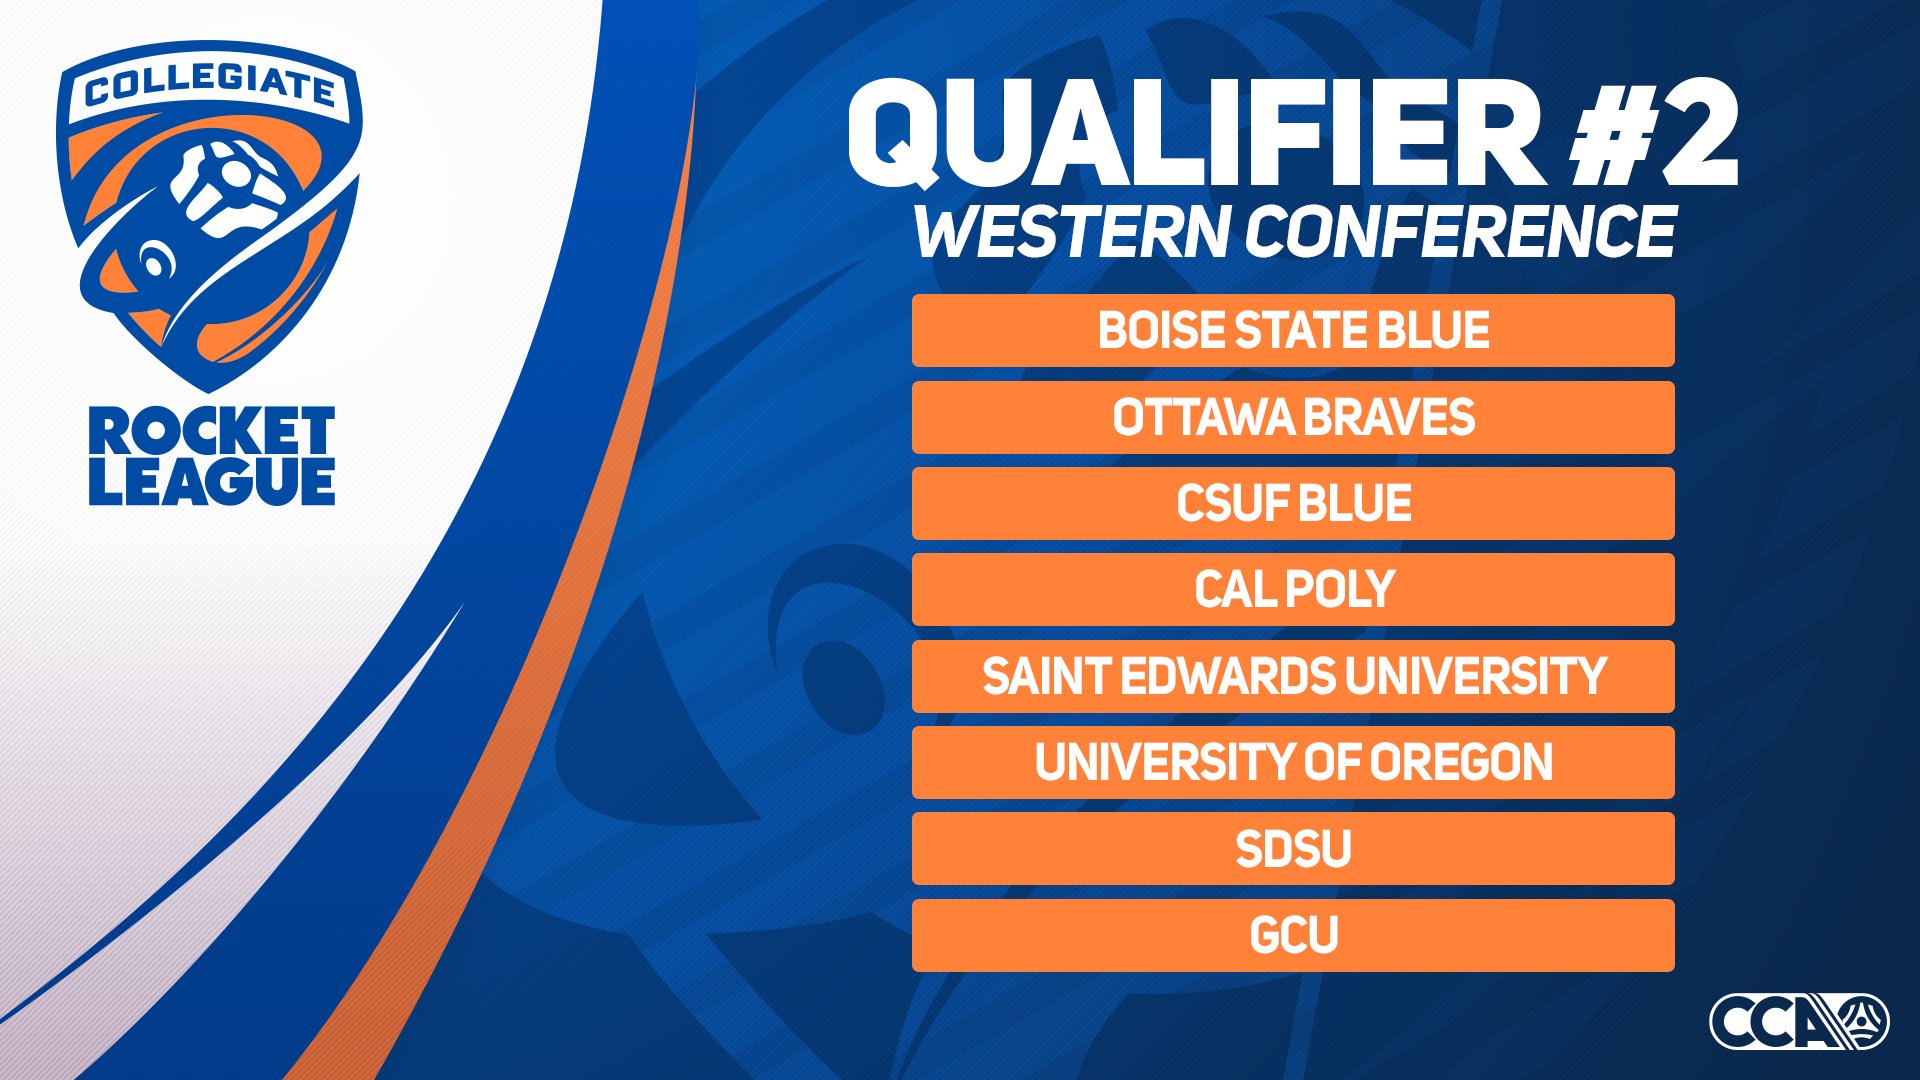 Qualifer #2 Western Conference Graphic